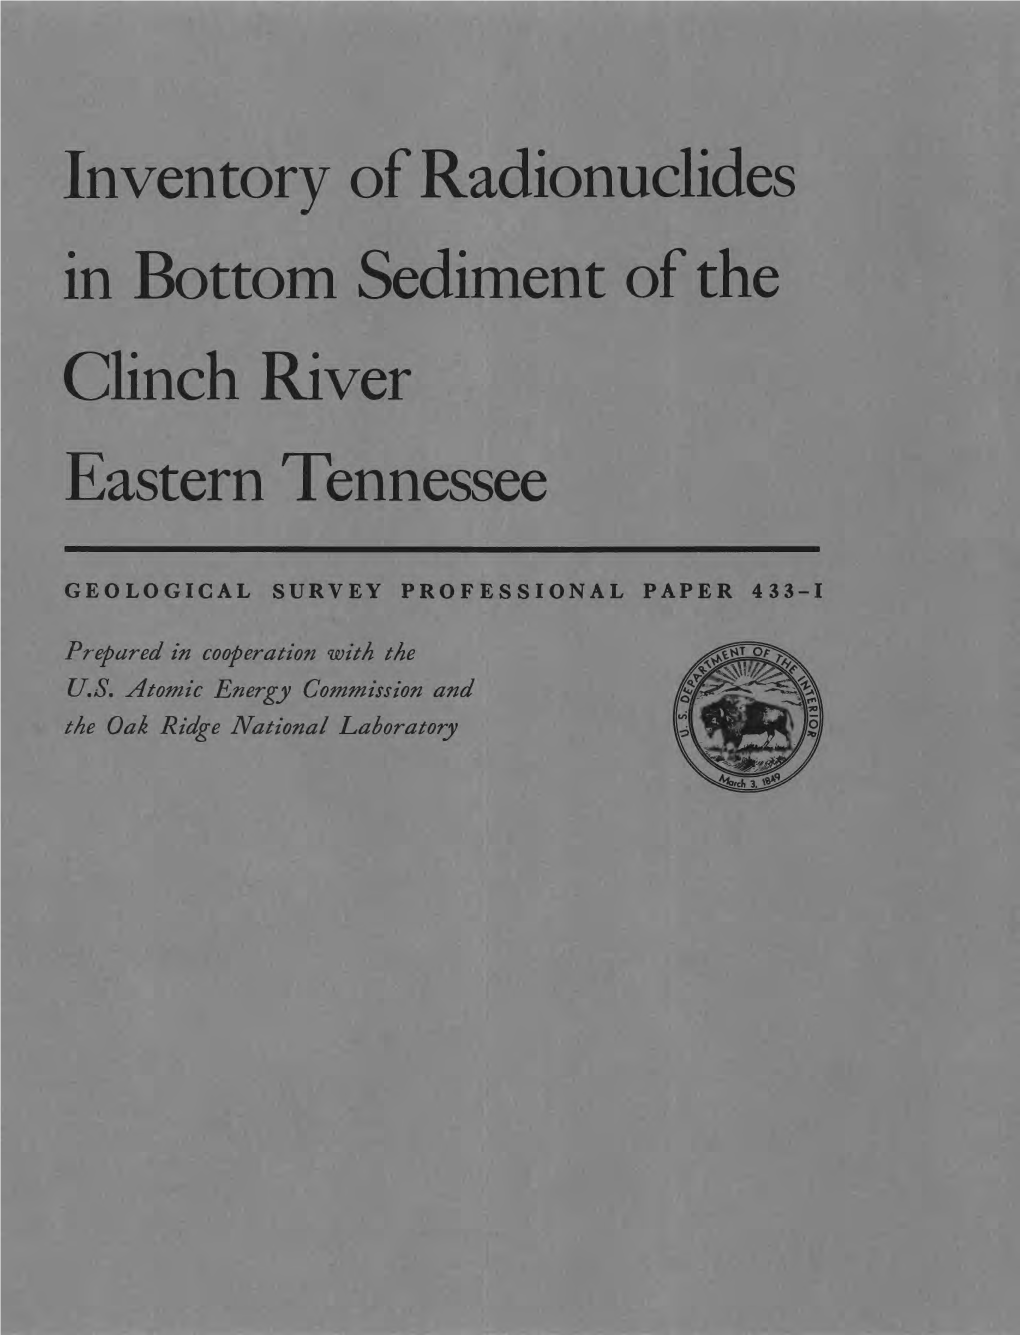 Inventory of Radionuclides in Bottom Sediment of the Clinch River Eastern Tennessee